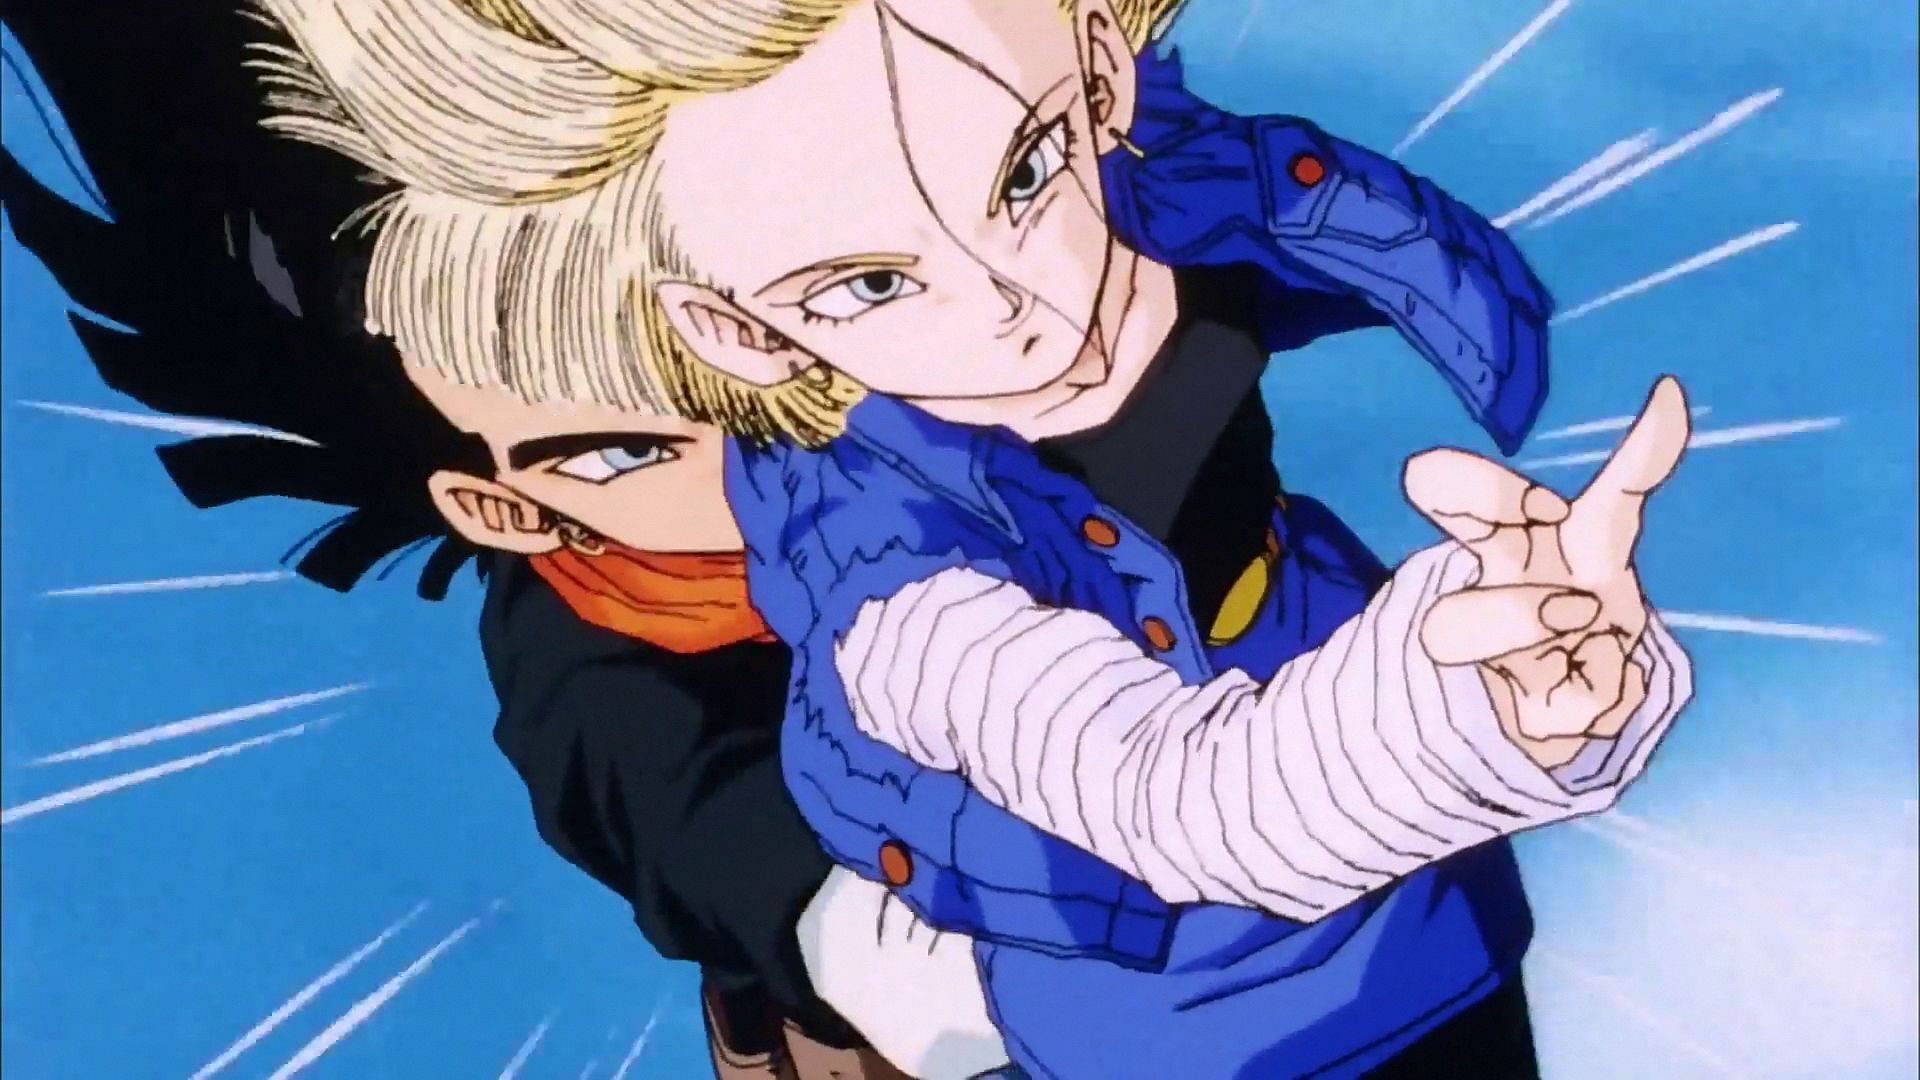 Android 17 and 18 in Dragon Ball Z (Image via Toei Animation)